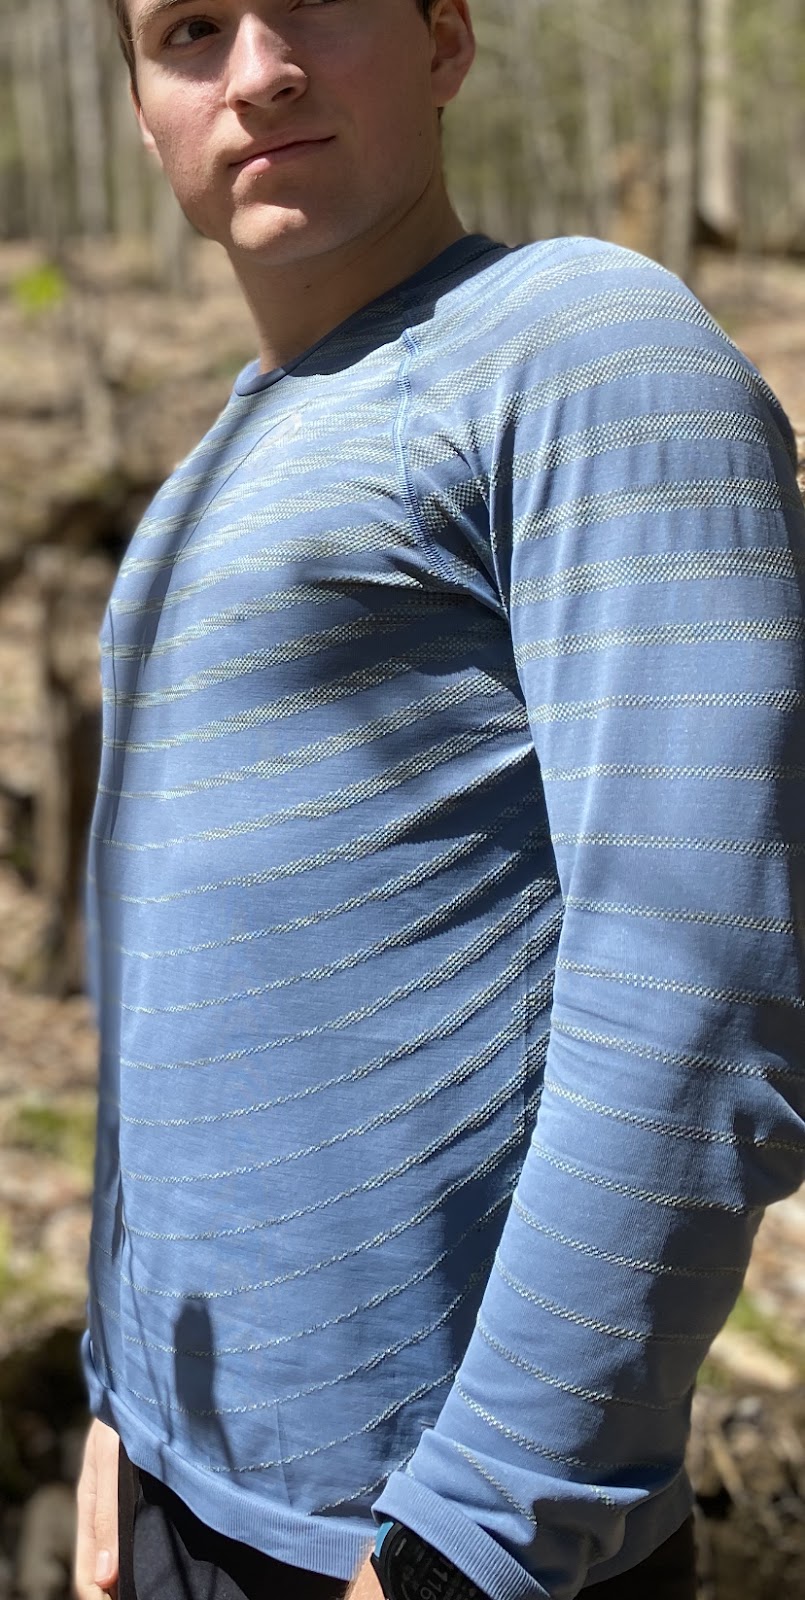 Ceramicool: Functional clothing with active cooling